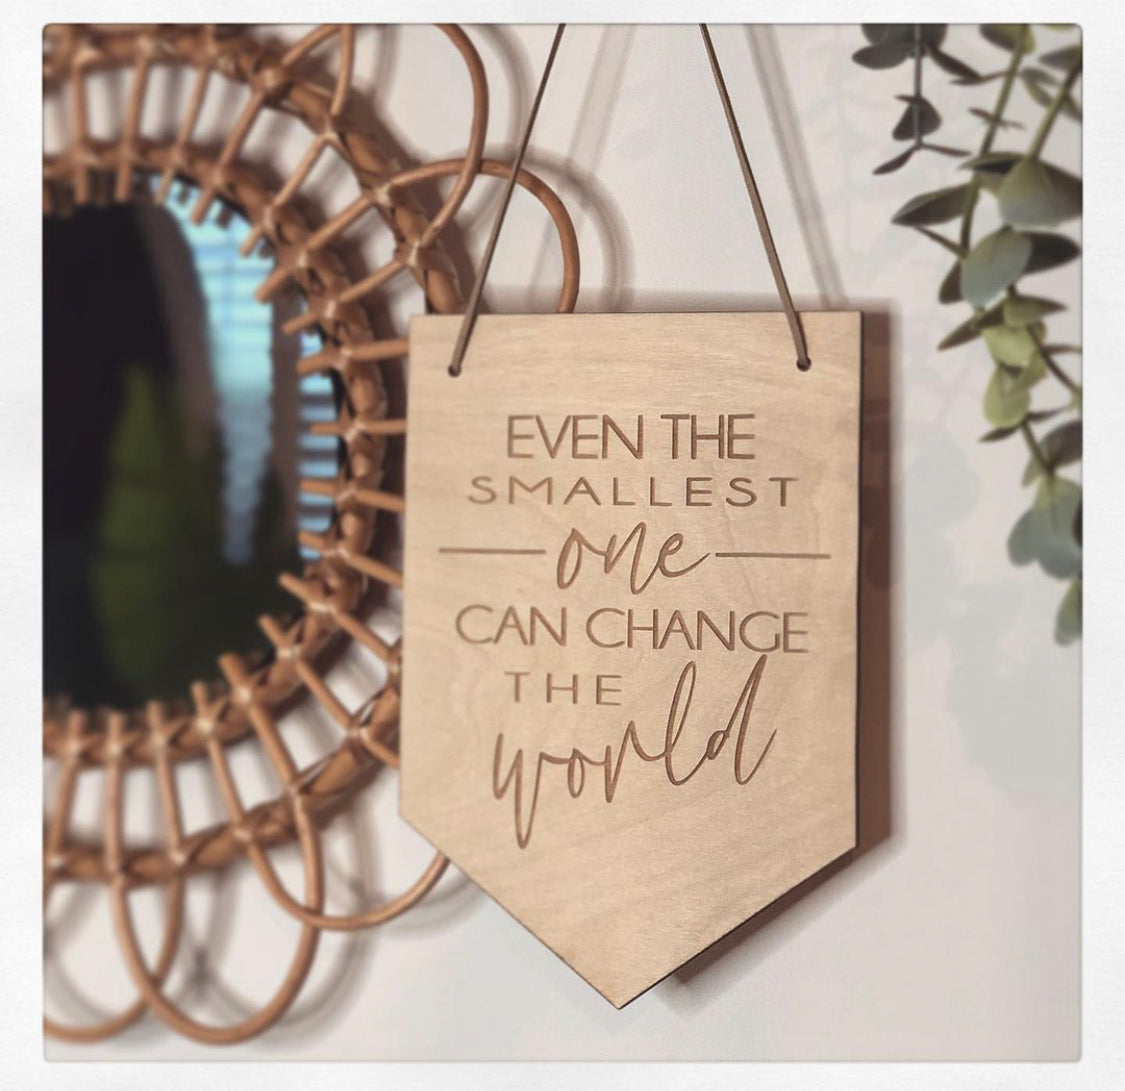 Even the Smallest One can Change the World Wall Hanging Plaque